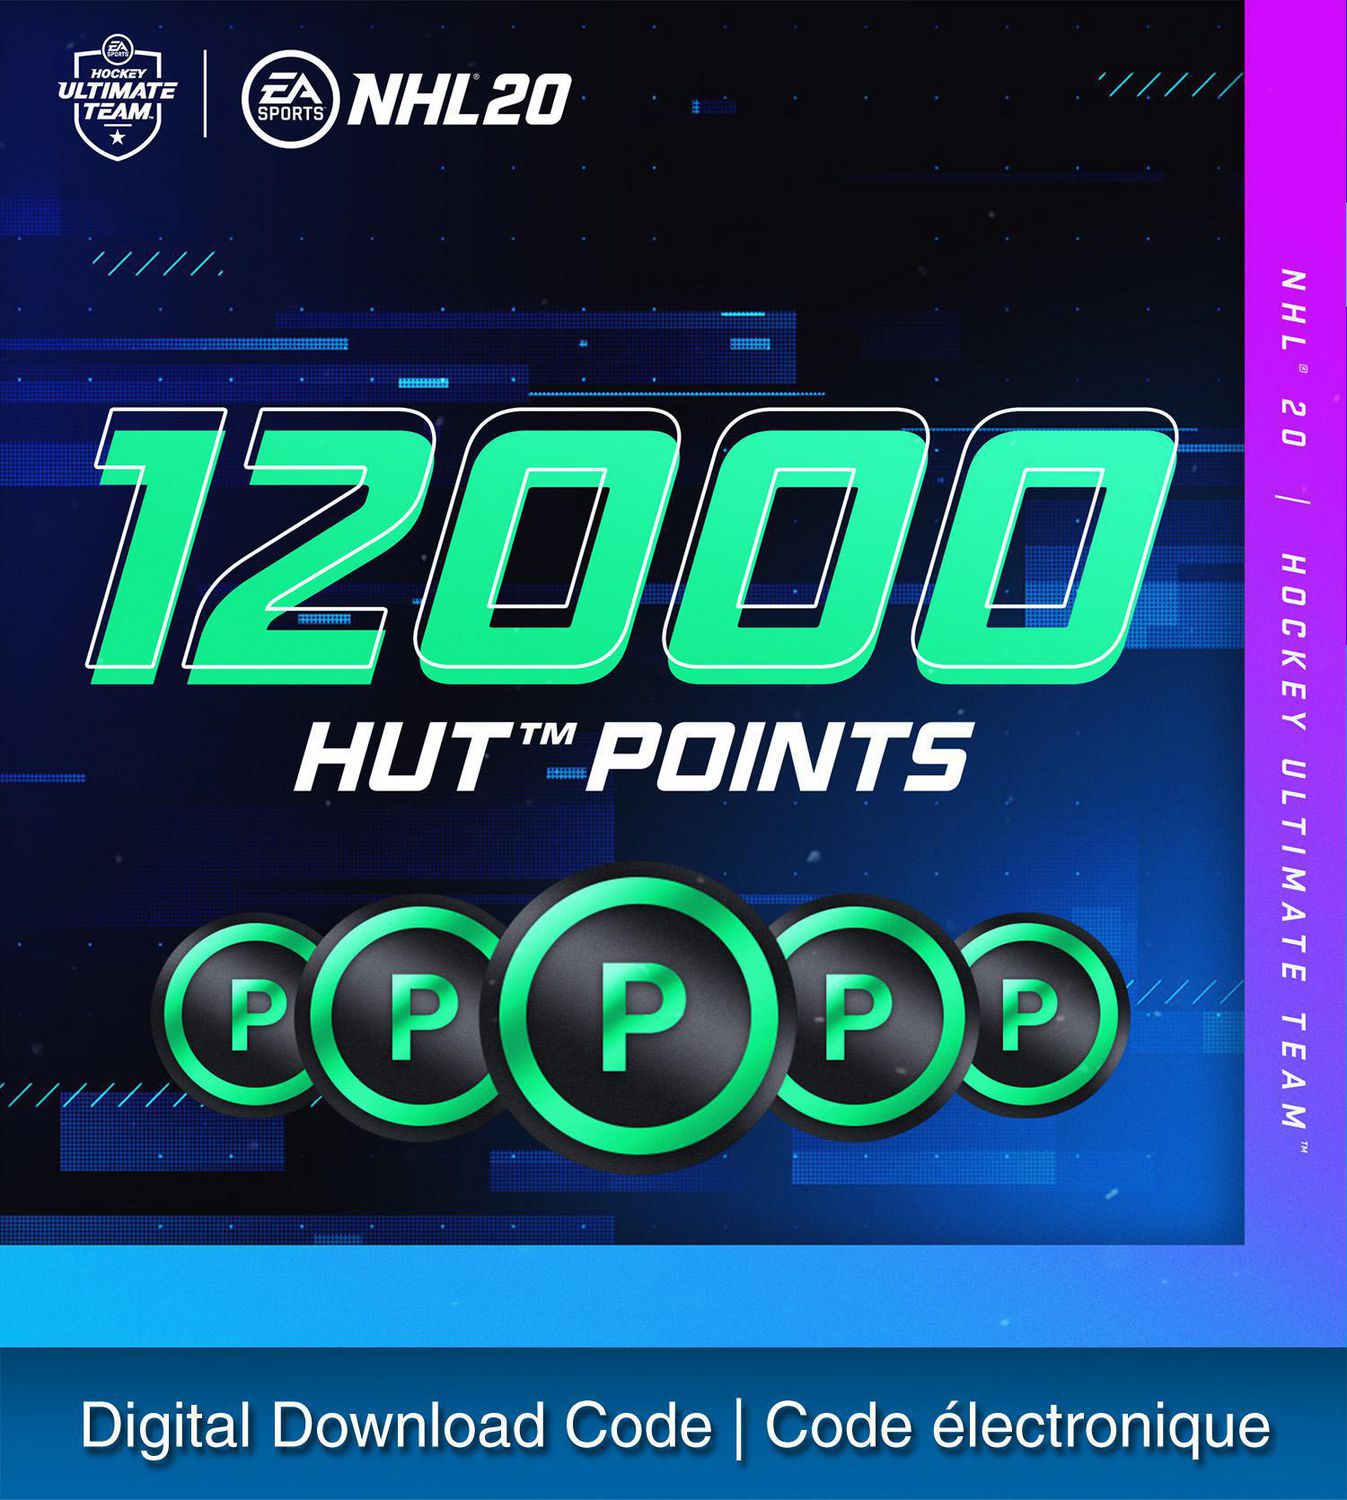 ps4 nhl 20 discount code